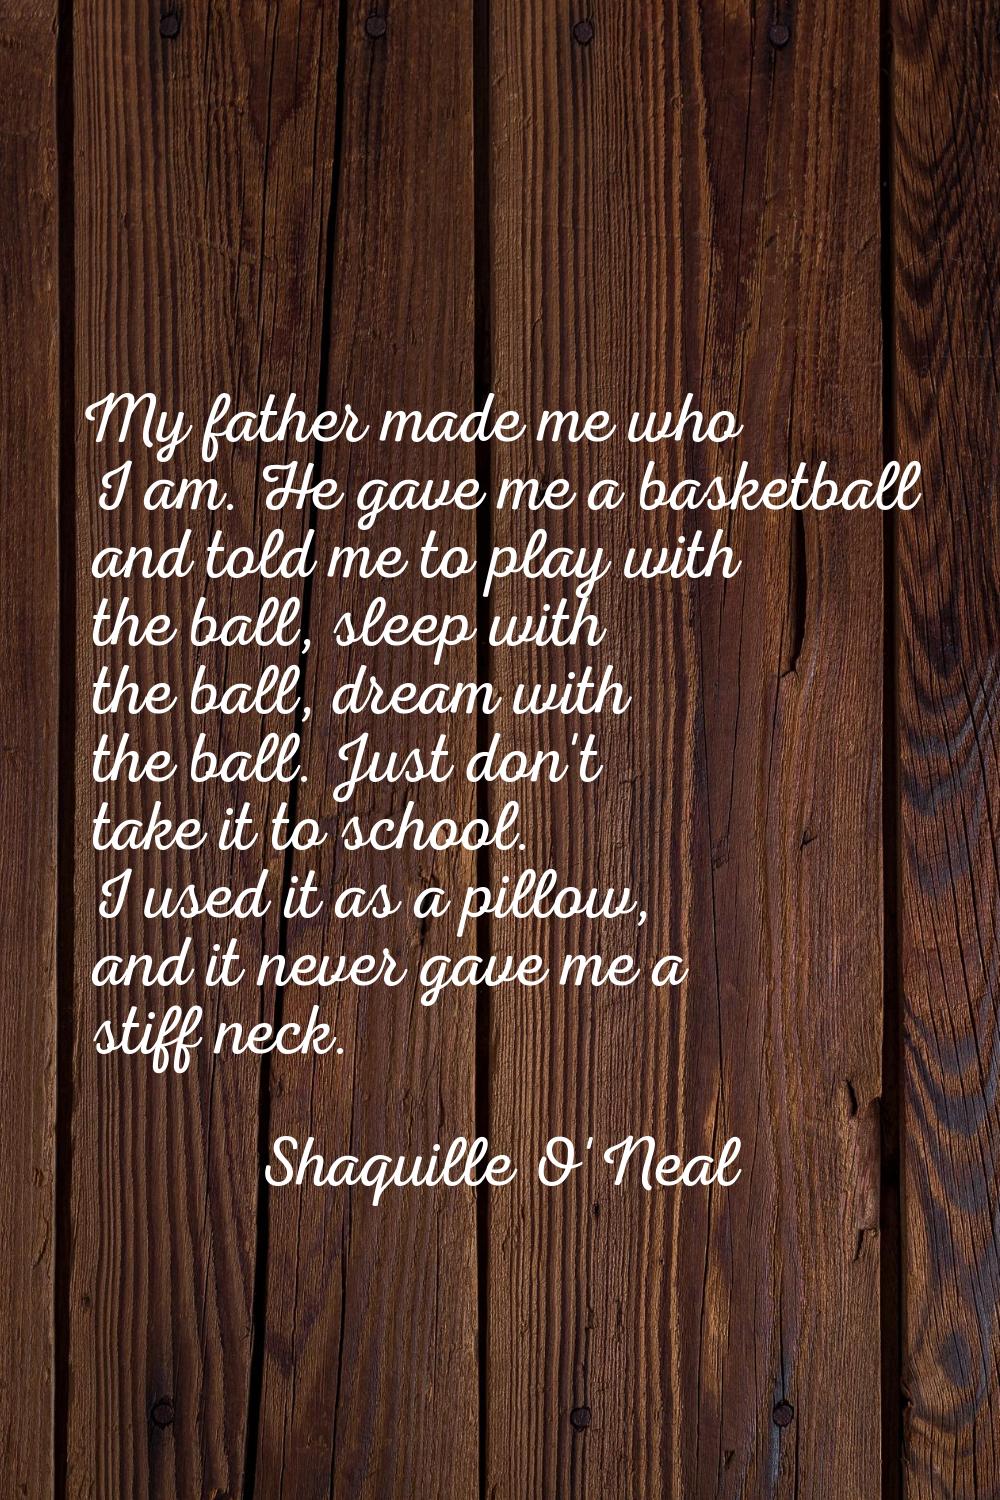 My father made me who I am. He gave me a basketball and told me to play with the ball, sleep with t